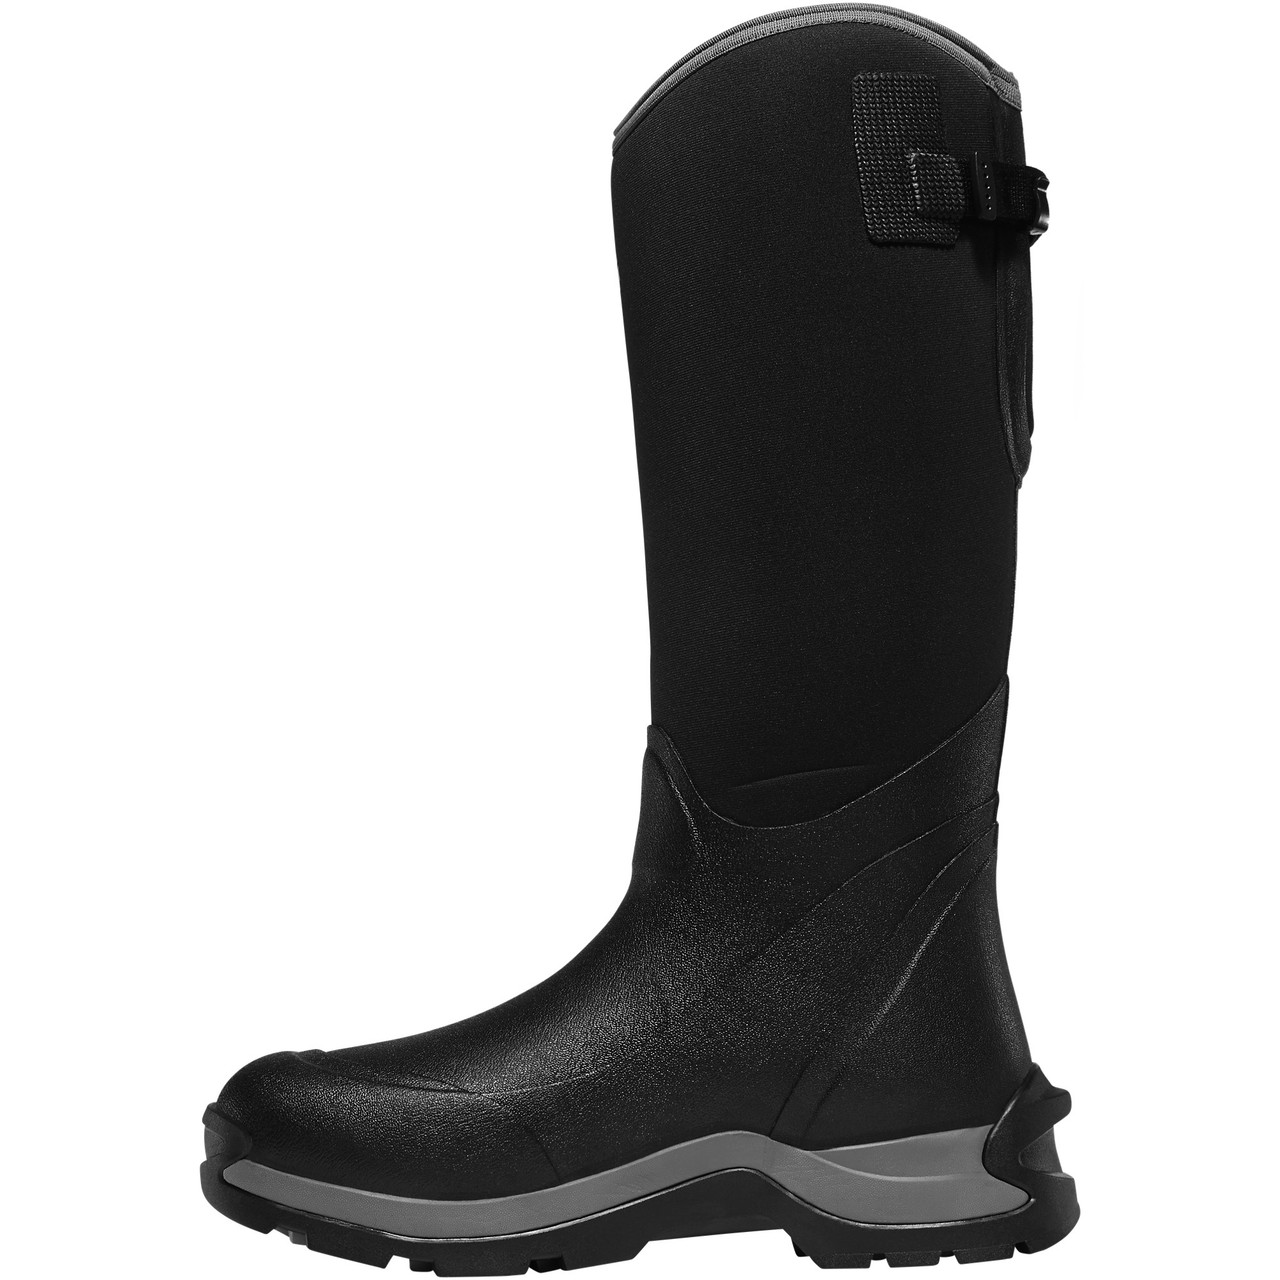 LACROSSE ALPHA THERMAL 16" BLACK 7.00MM NMT UTILITY BOOTS 644103